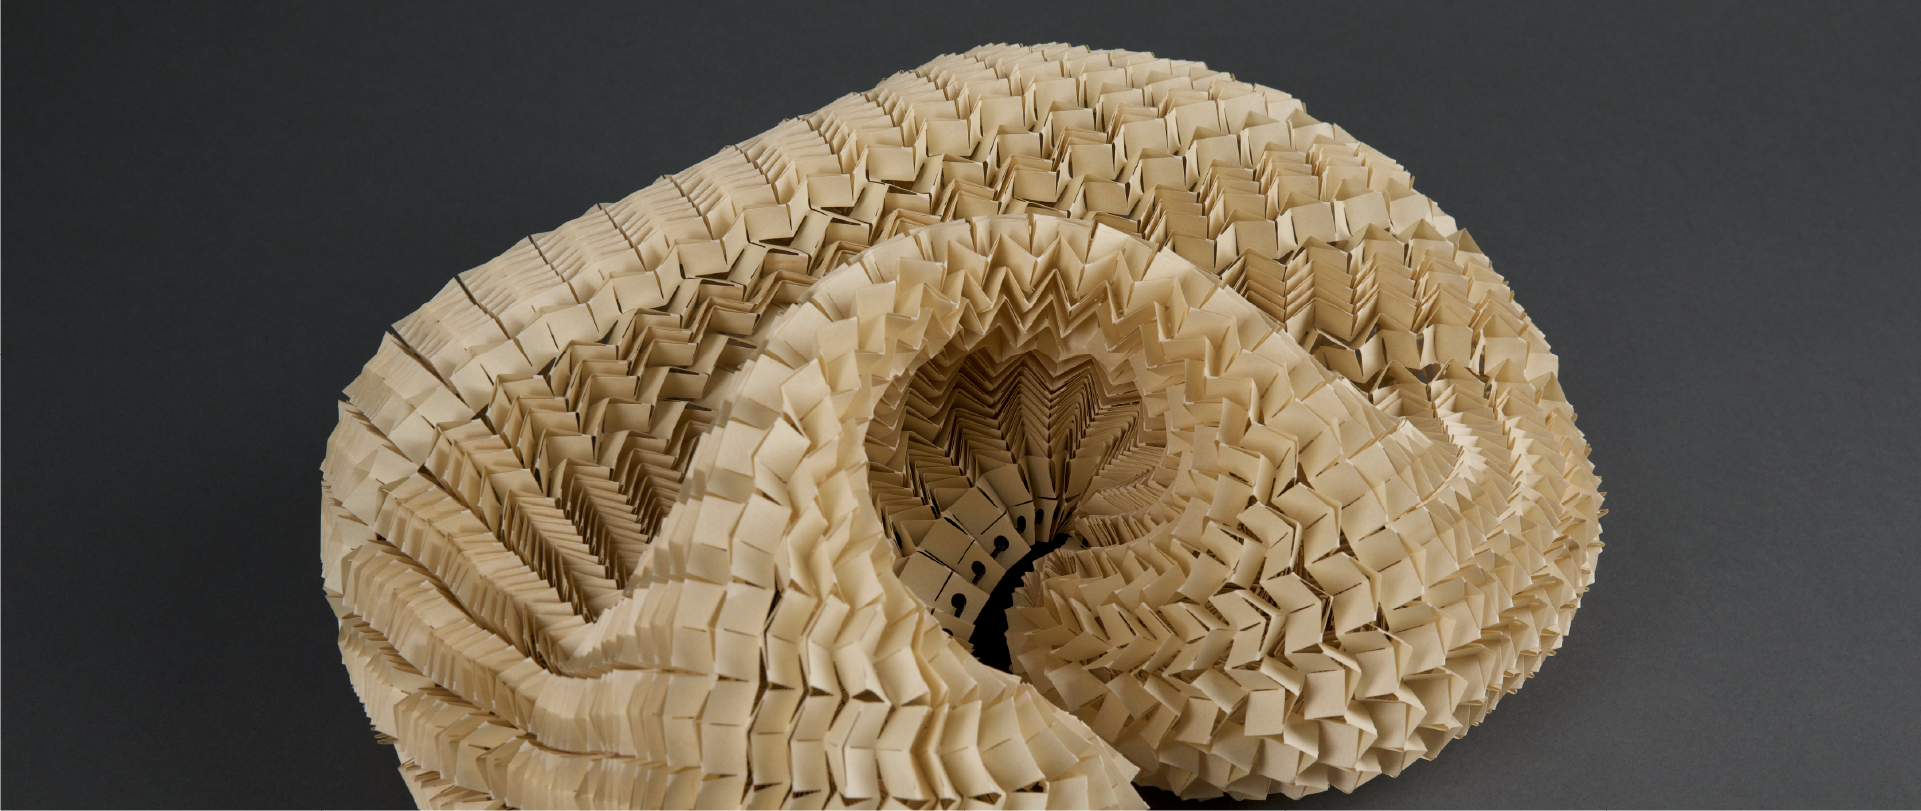 A paper sculpture made out of a paper mesh created from a method called kirigami.